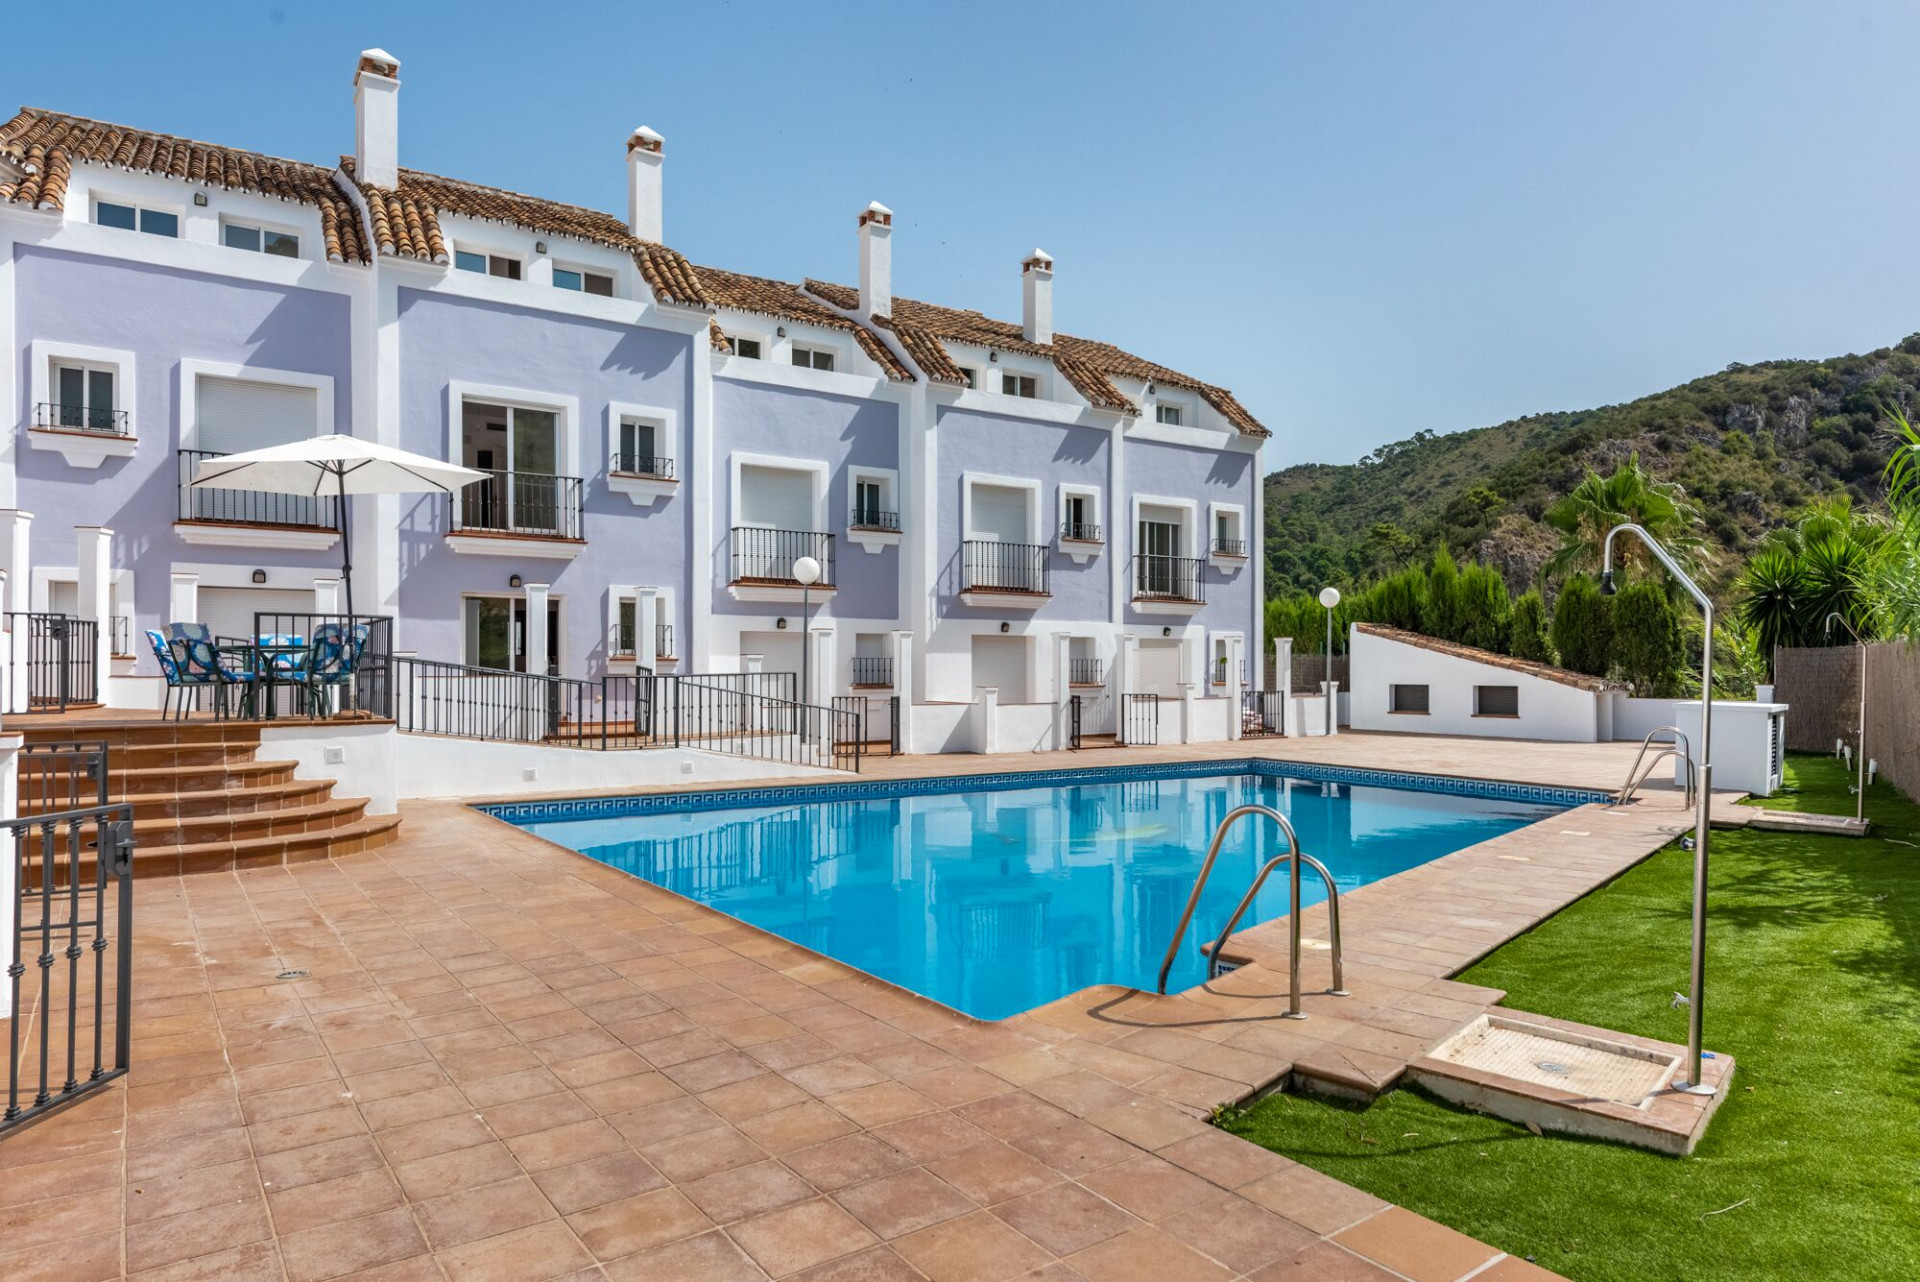 Modern Andalusian style townhouses for sale in Benahavis downtown